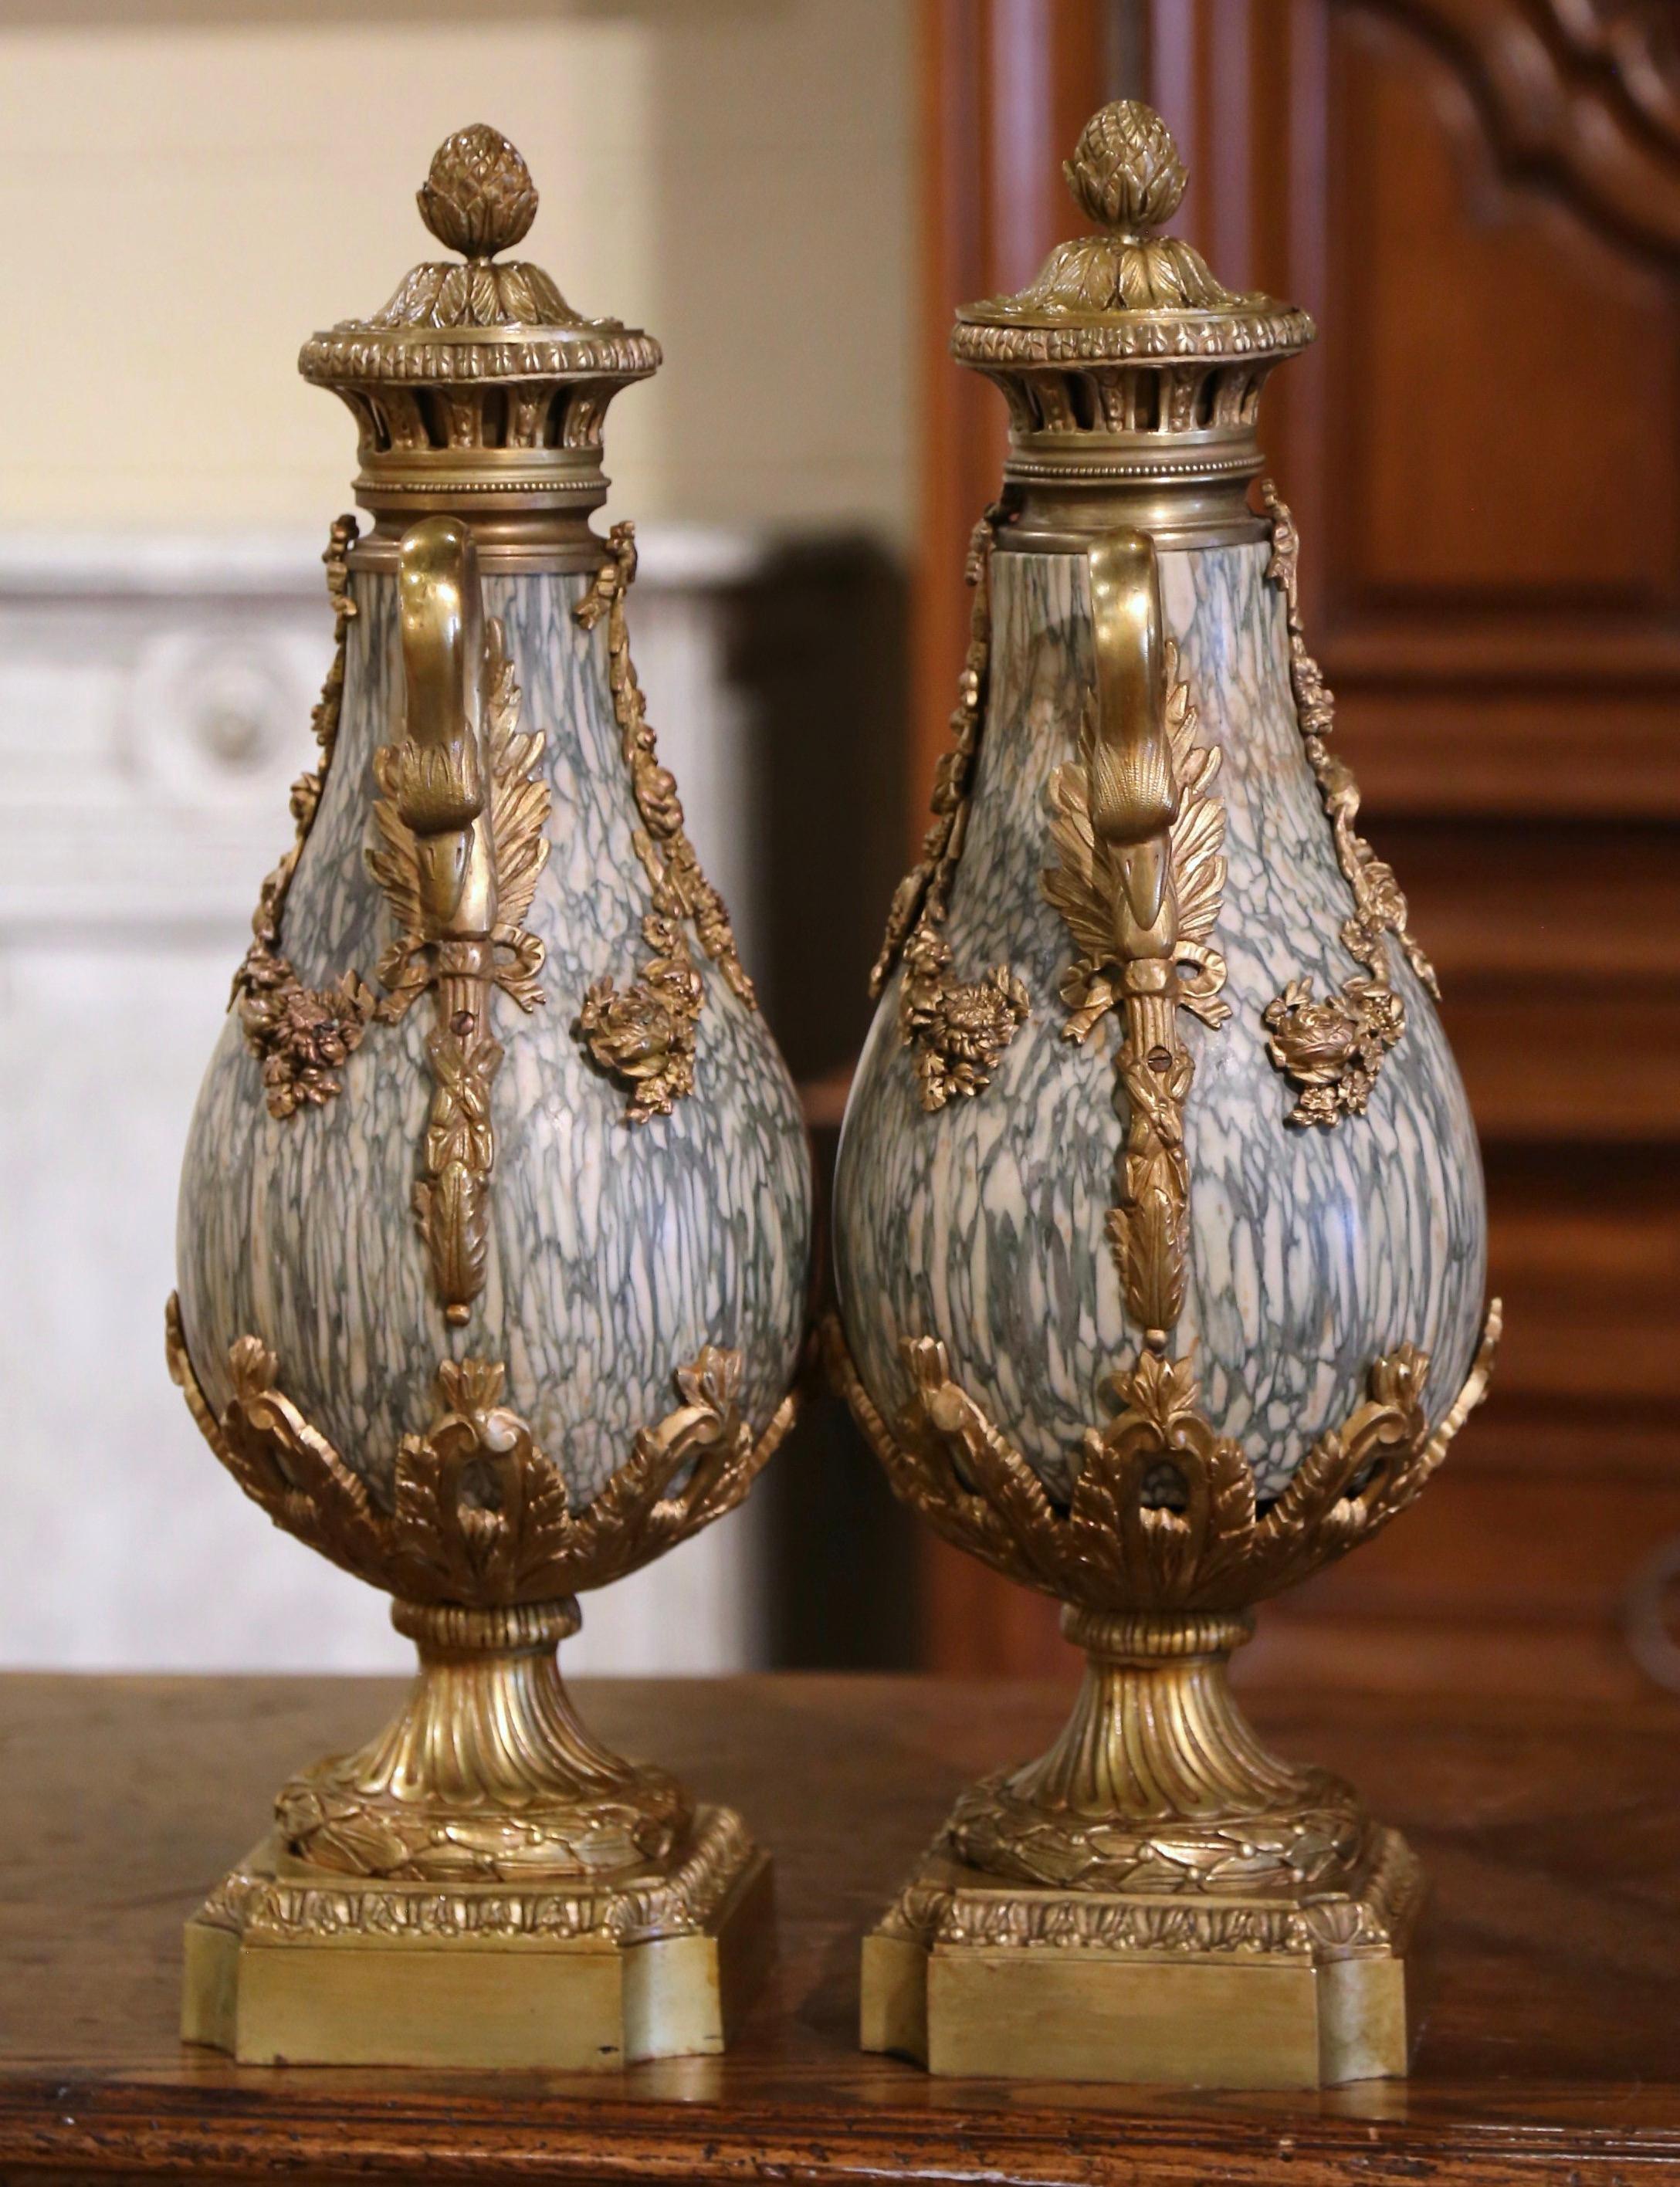 Pair of 19th Century French Gilt Bronze and Marble Mantel Urns Casolettes For Sale 3